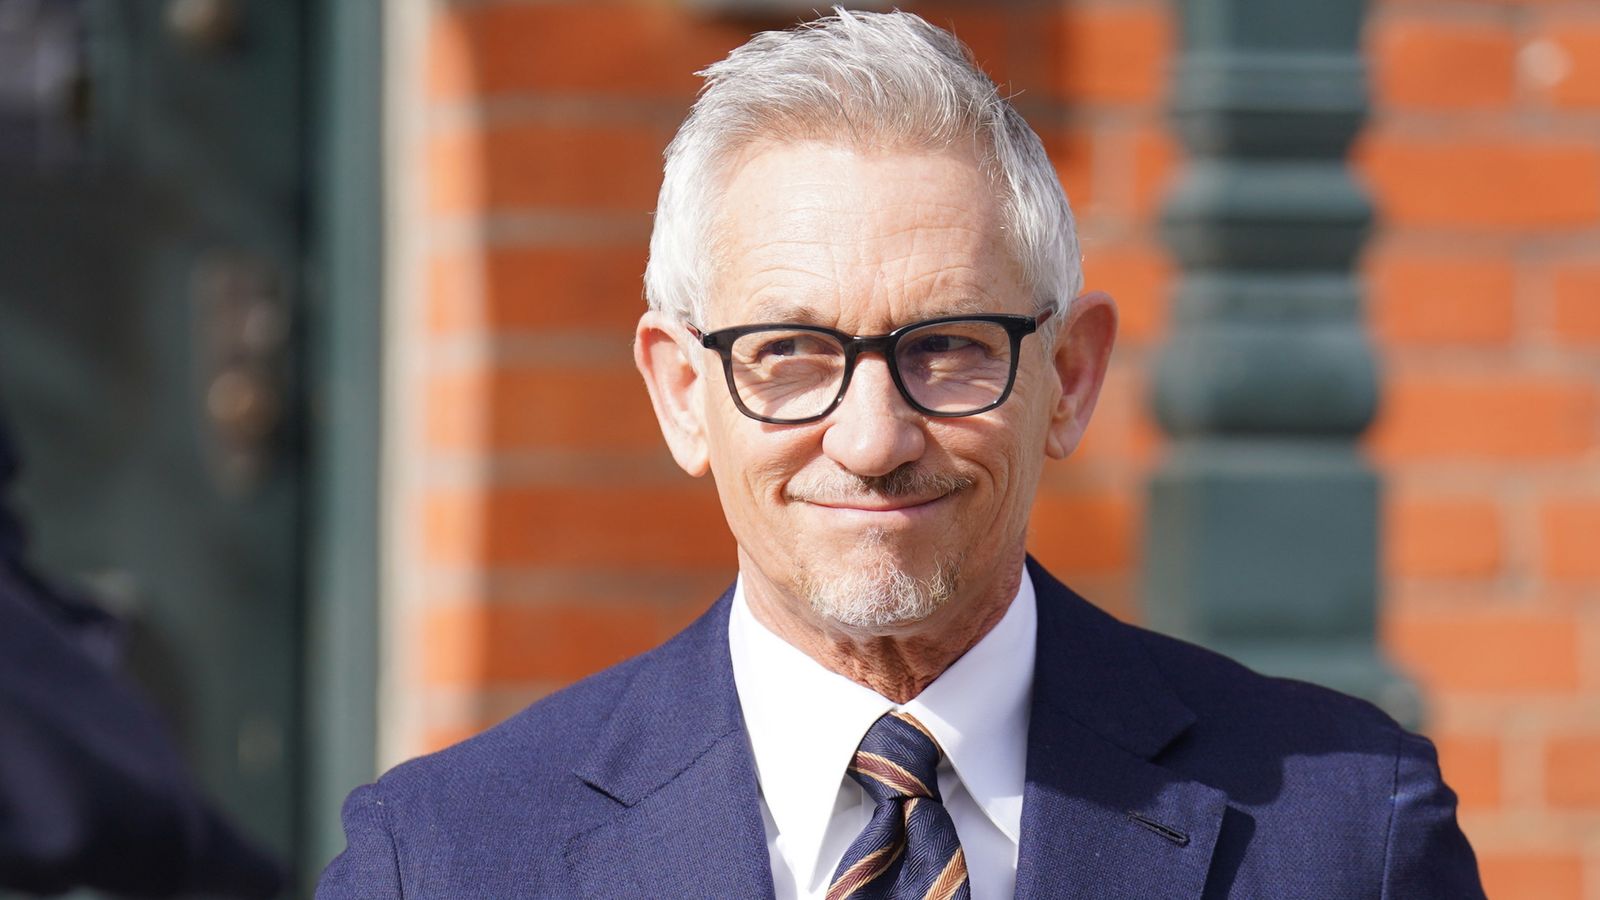 Gary Lineker hits back at Tory MP's 'dangerously provocative' Nazi claims